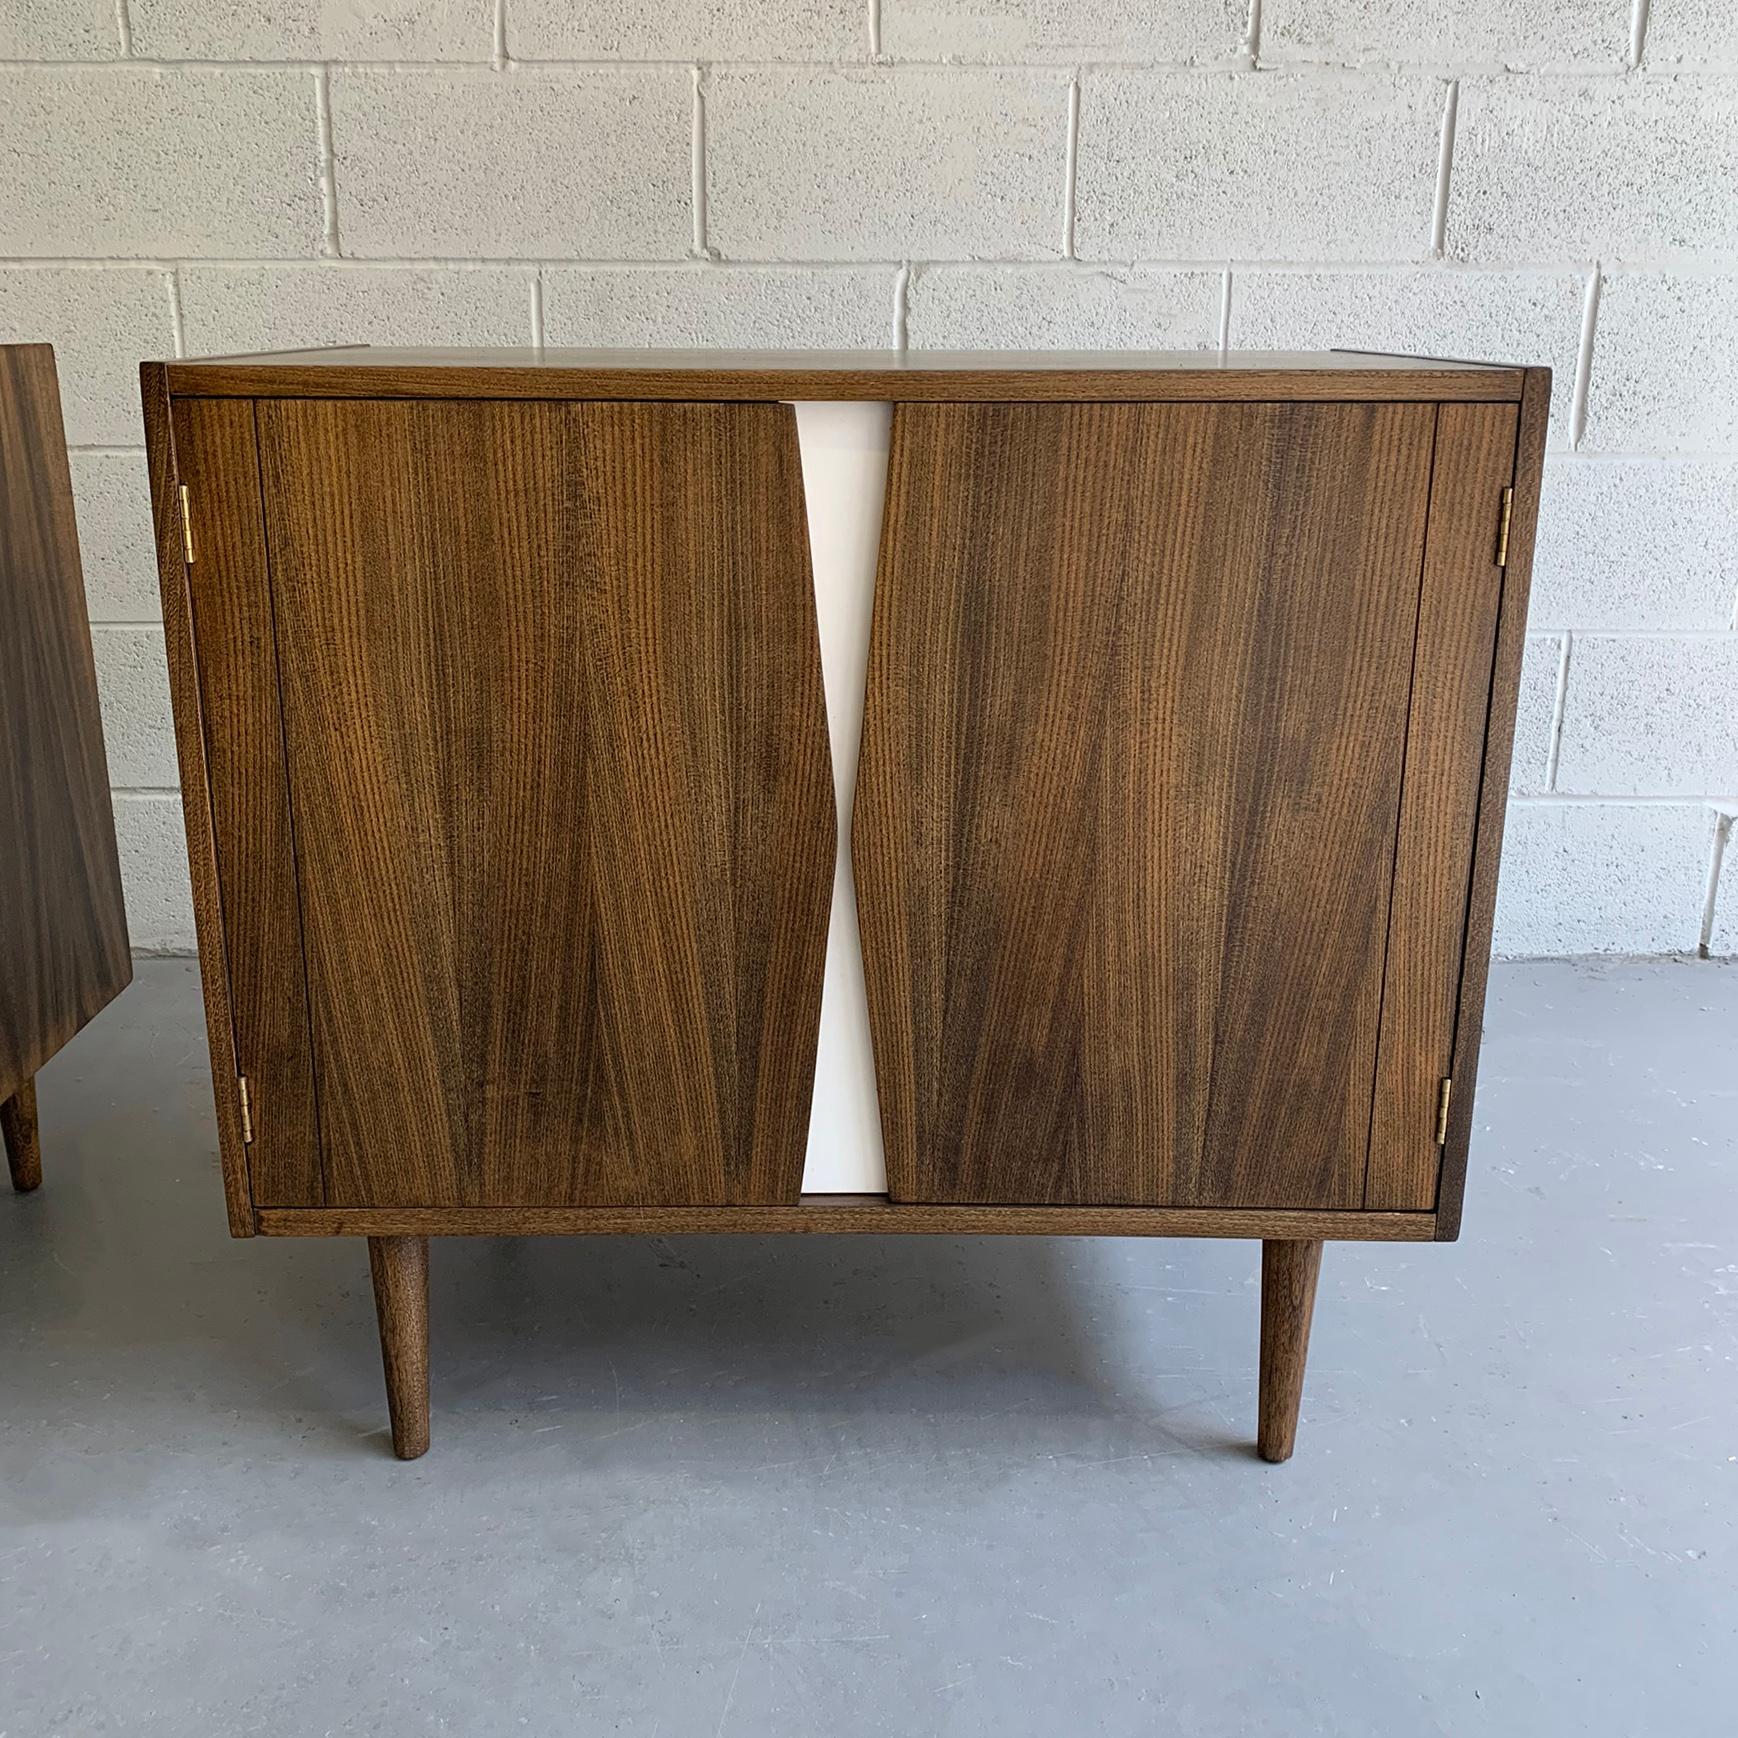 Pair of Mid-Century Modern Dresser Credenza Cabinets by American of Martinsville 1